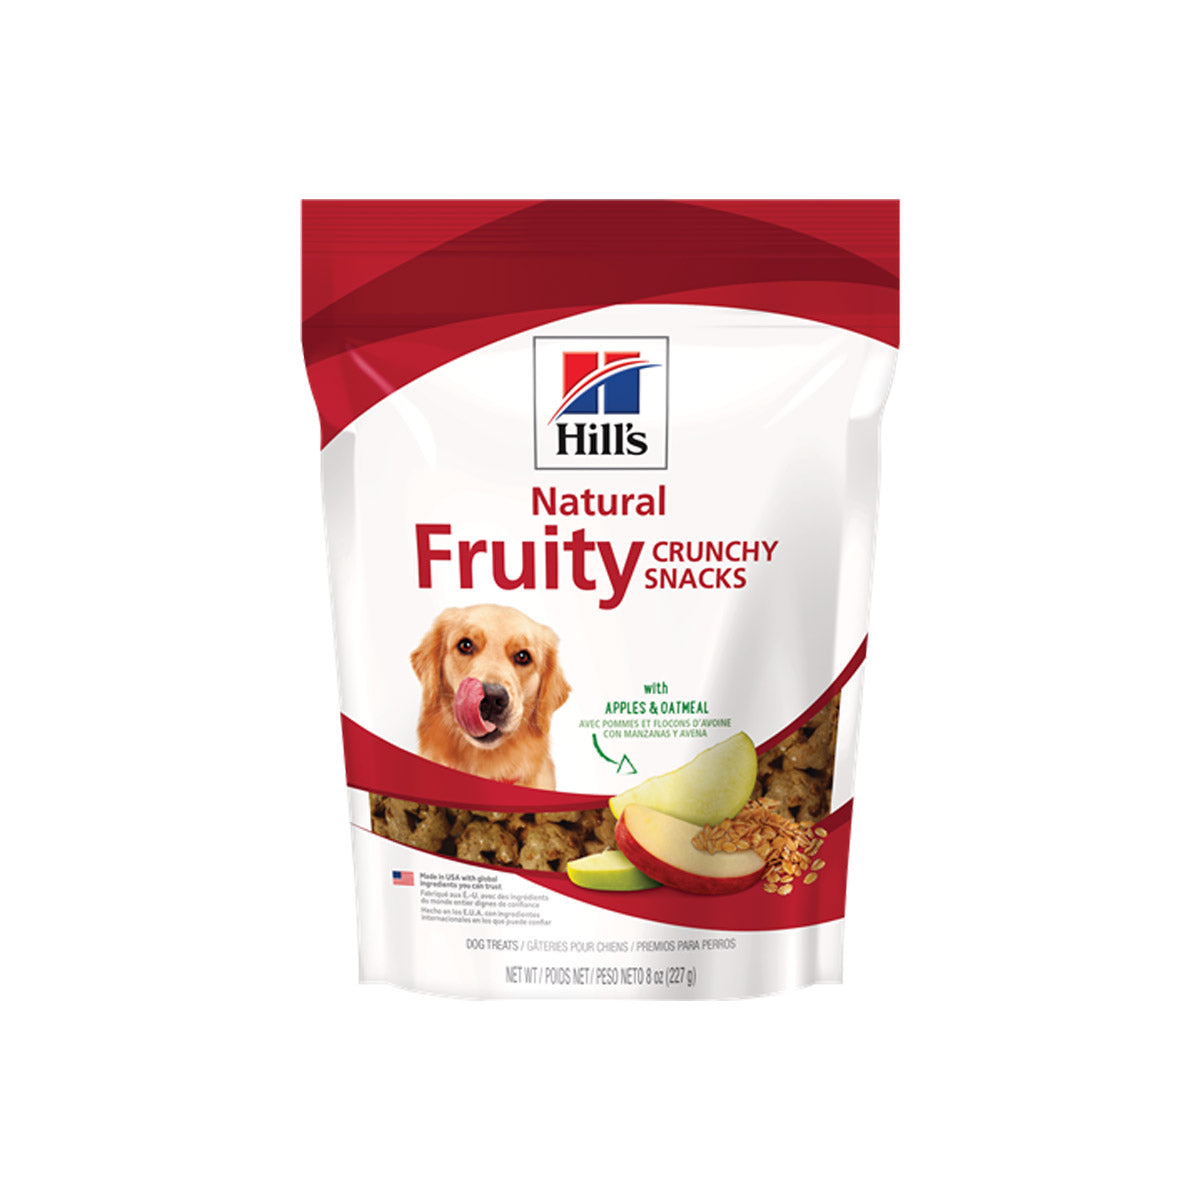 Hill's Natural Fruity Crunchy Snacks Treats Canine with Apple and Oatmeal